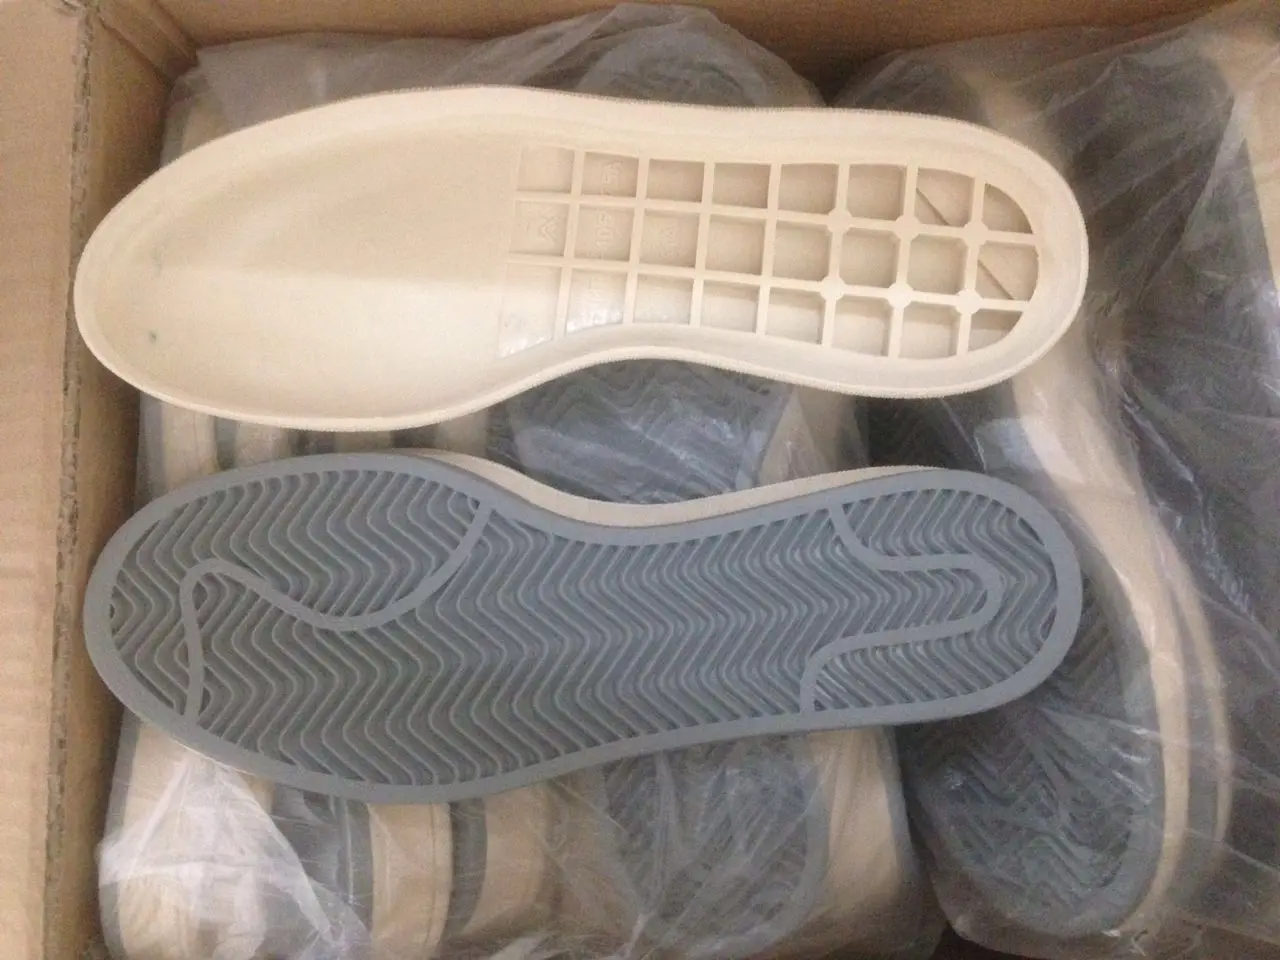 Good Quality Vibram Synthetic Rubber Outsoles For Shoes Suela - Buy ...